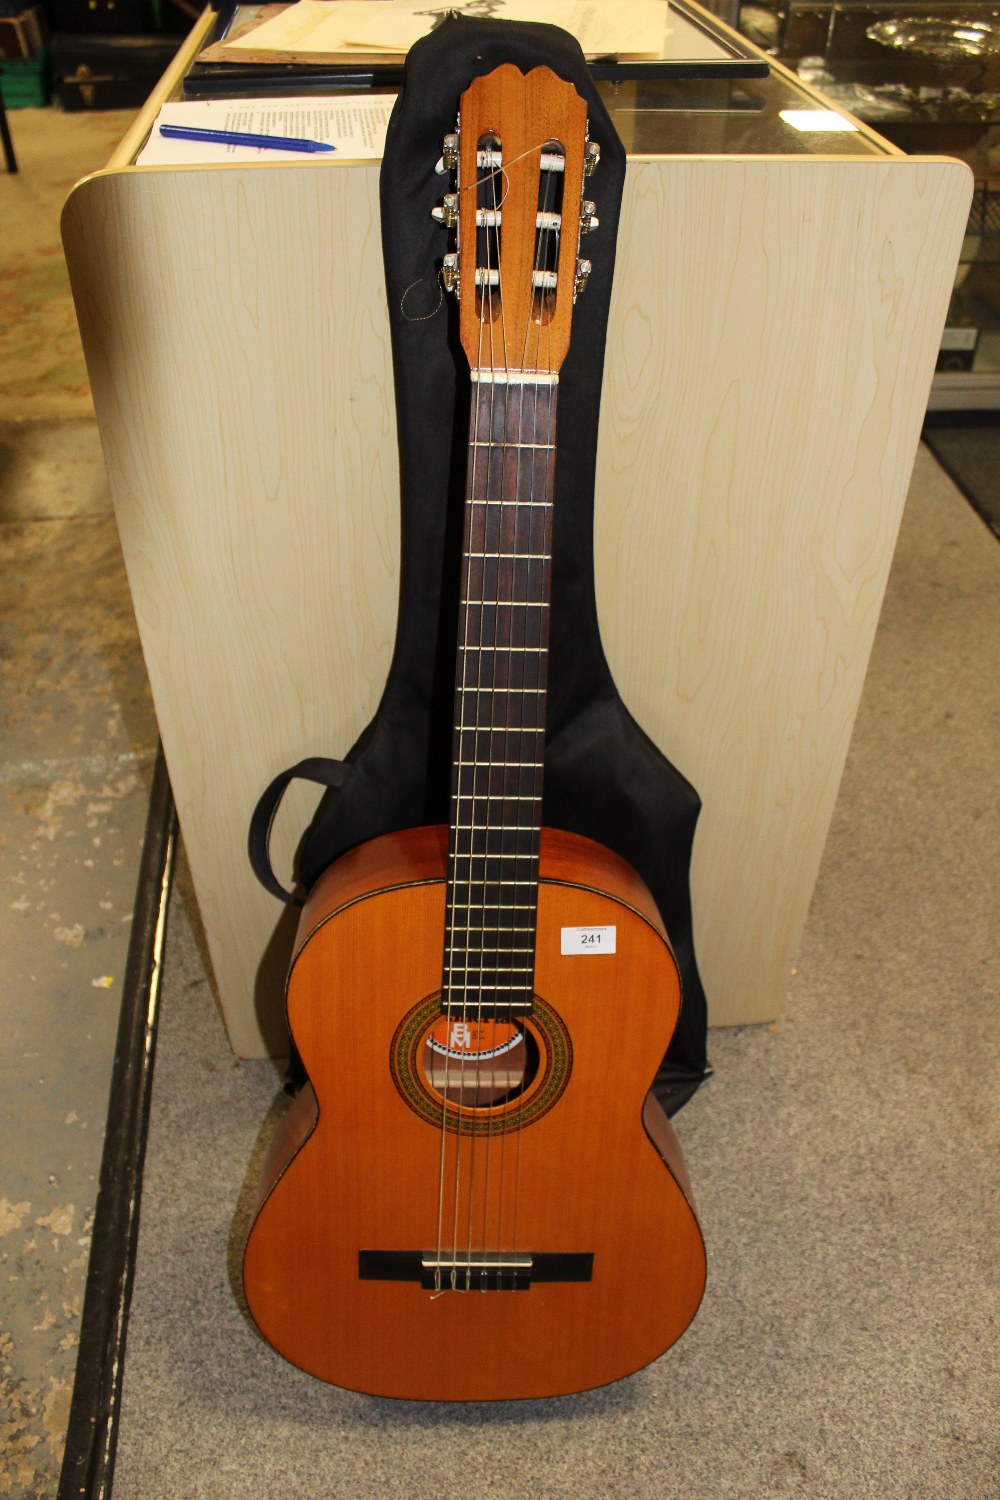 AN ALMERIA ACOUSTIC GUITAR WITH TRAVEL BAG